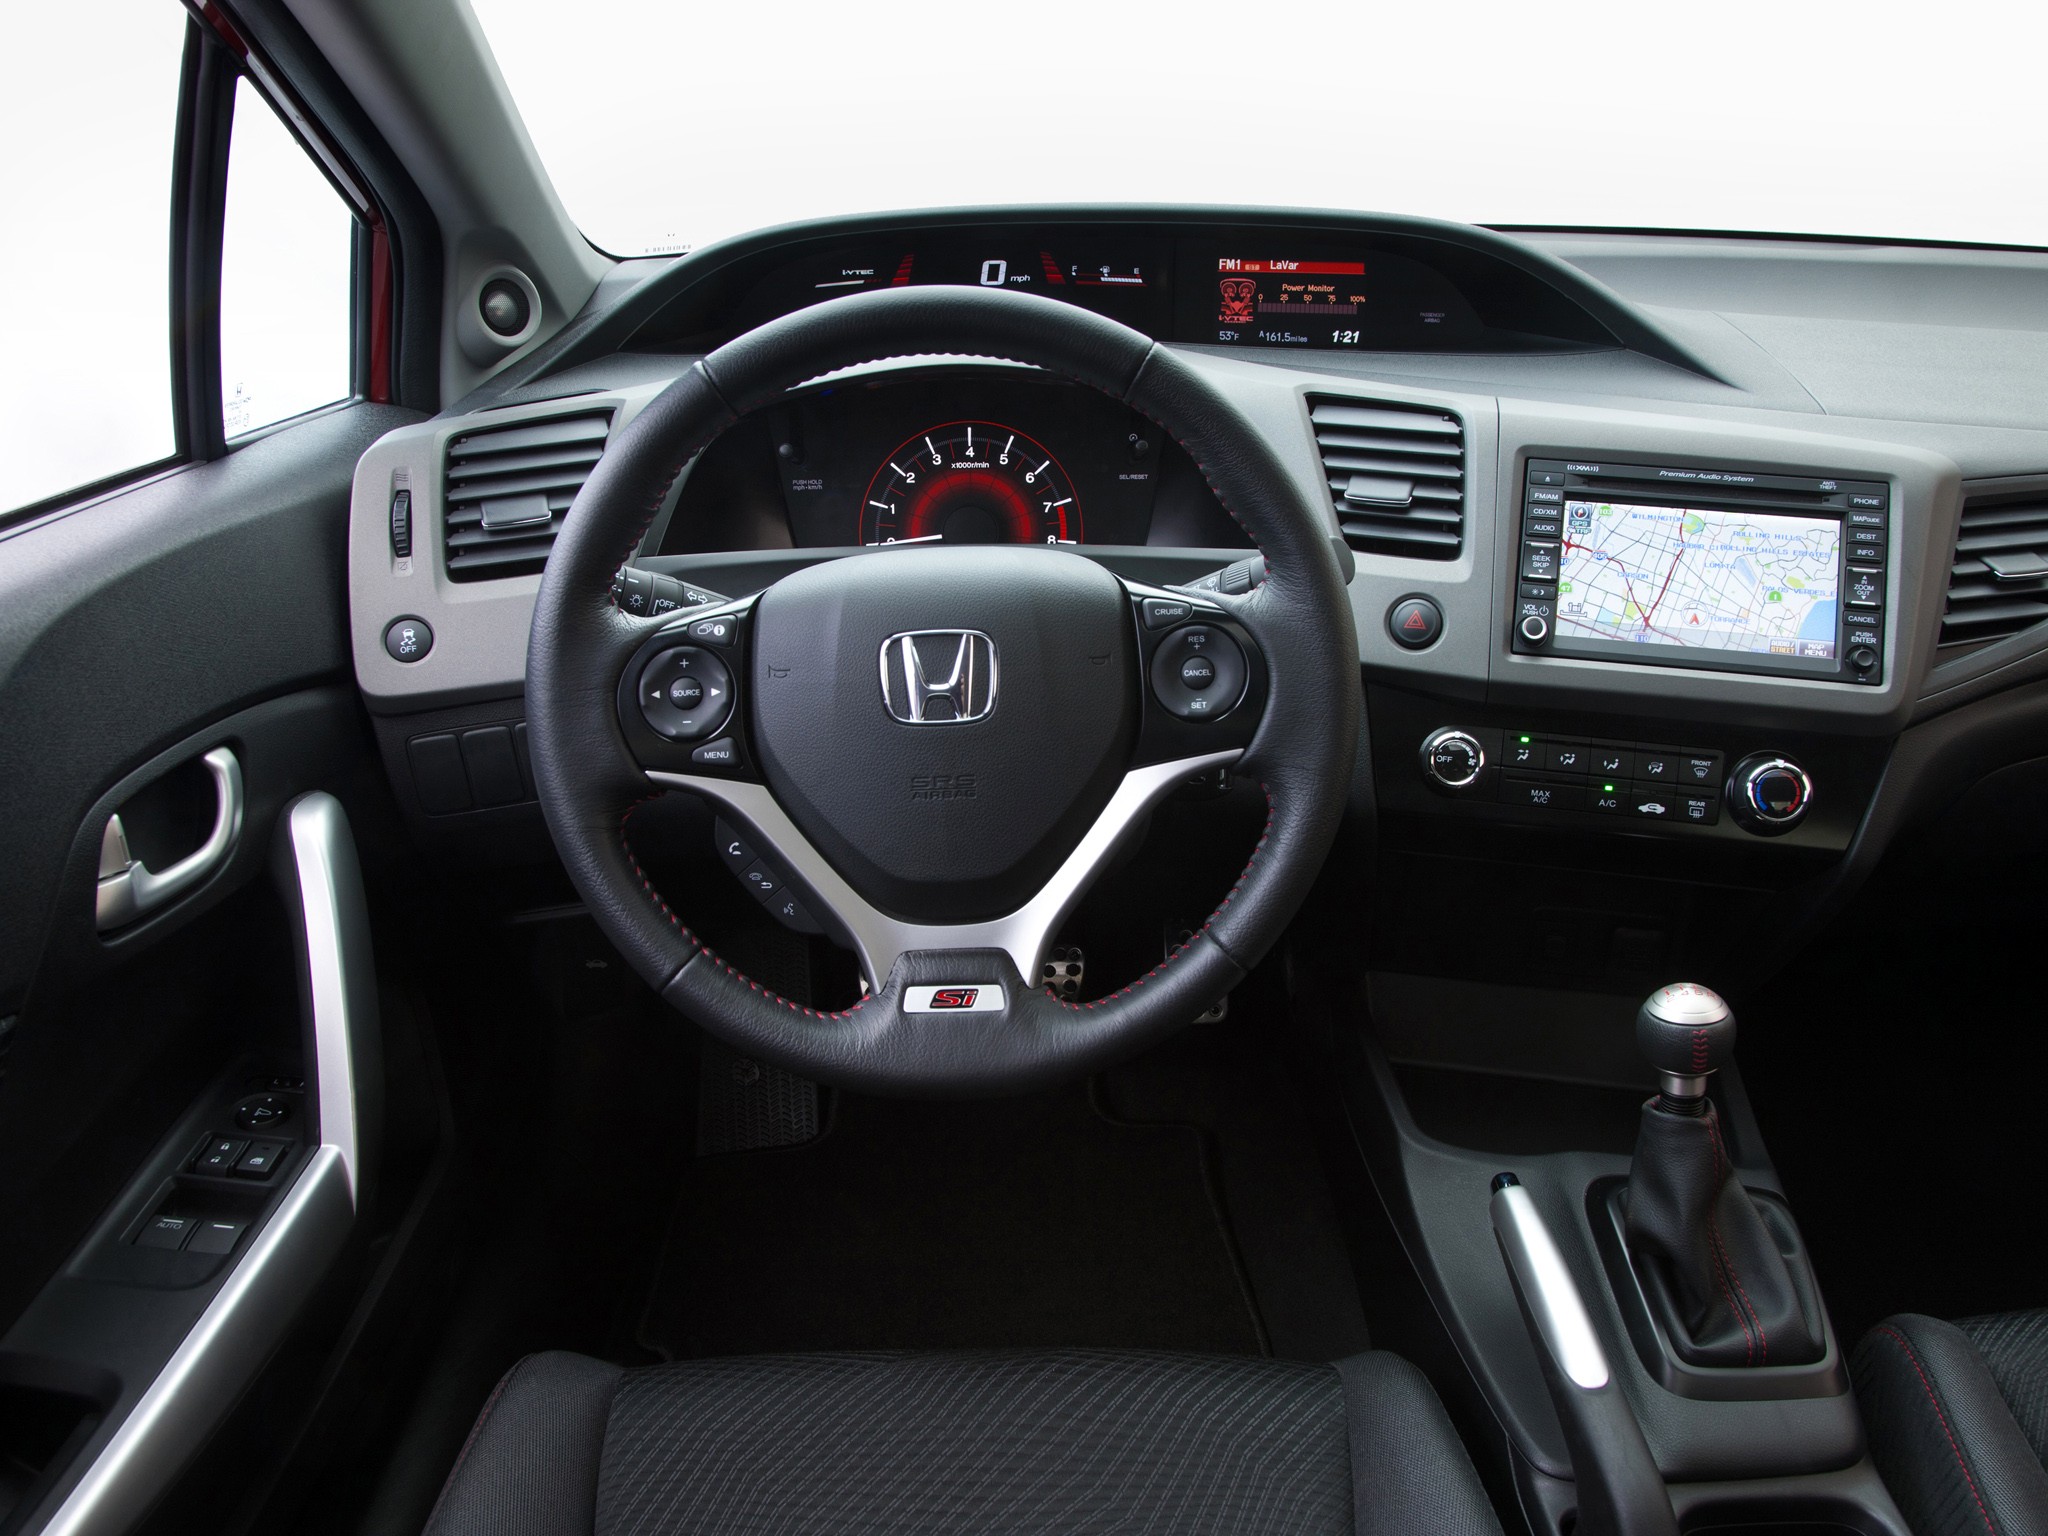 Honda Civic Si coupe (9th generation) 2.4 MT pictures.